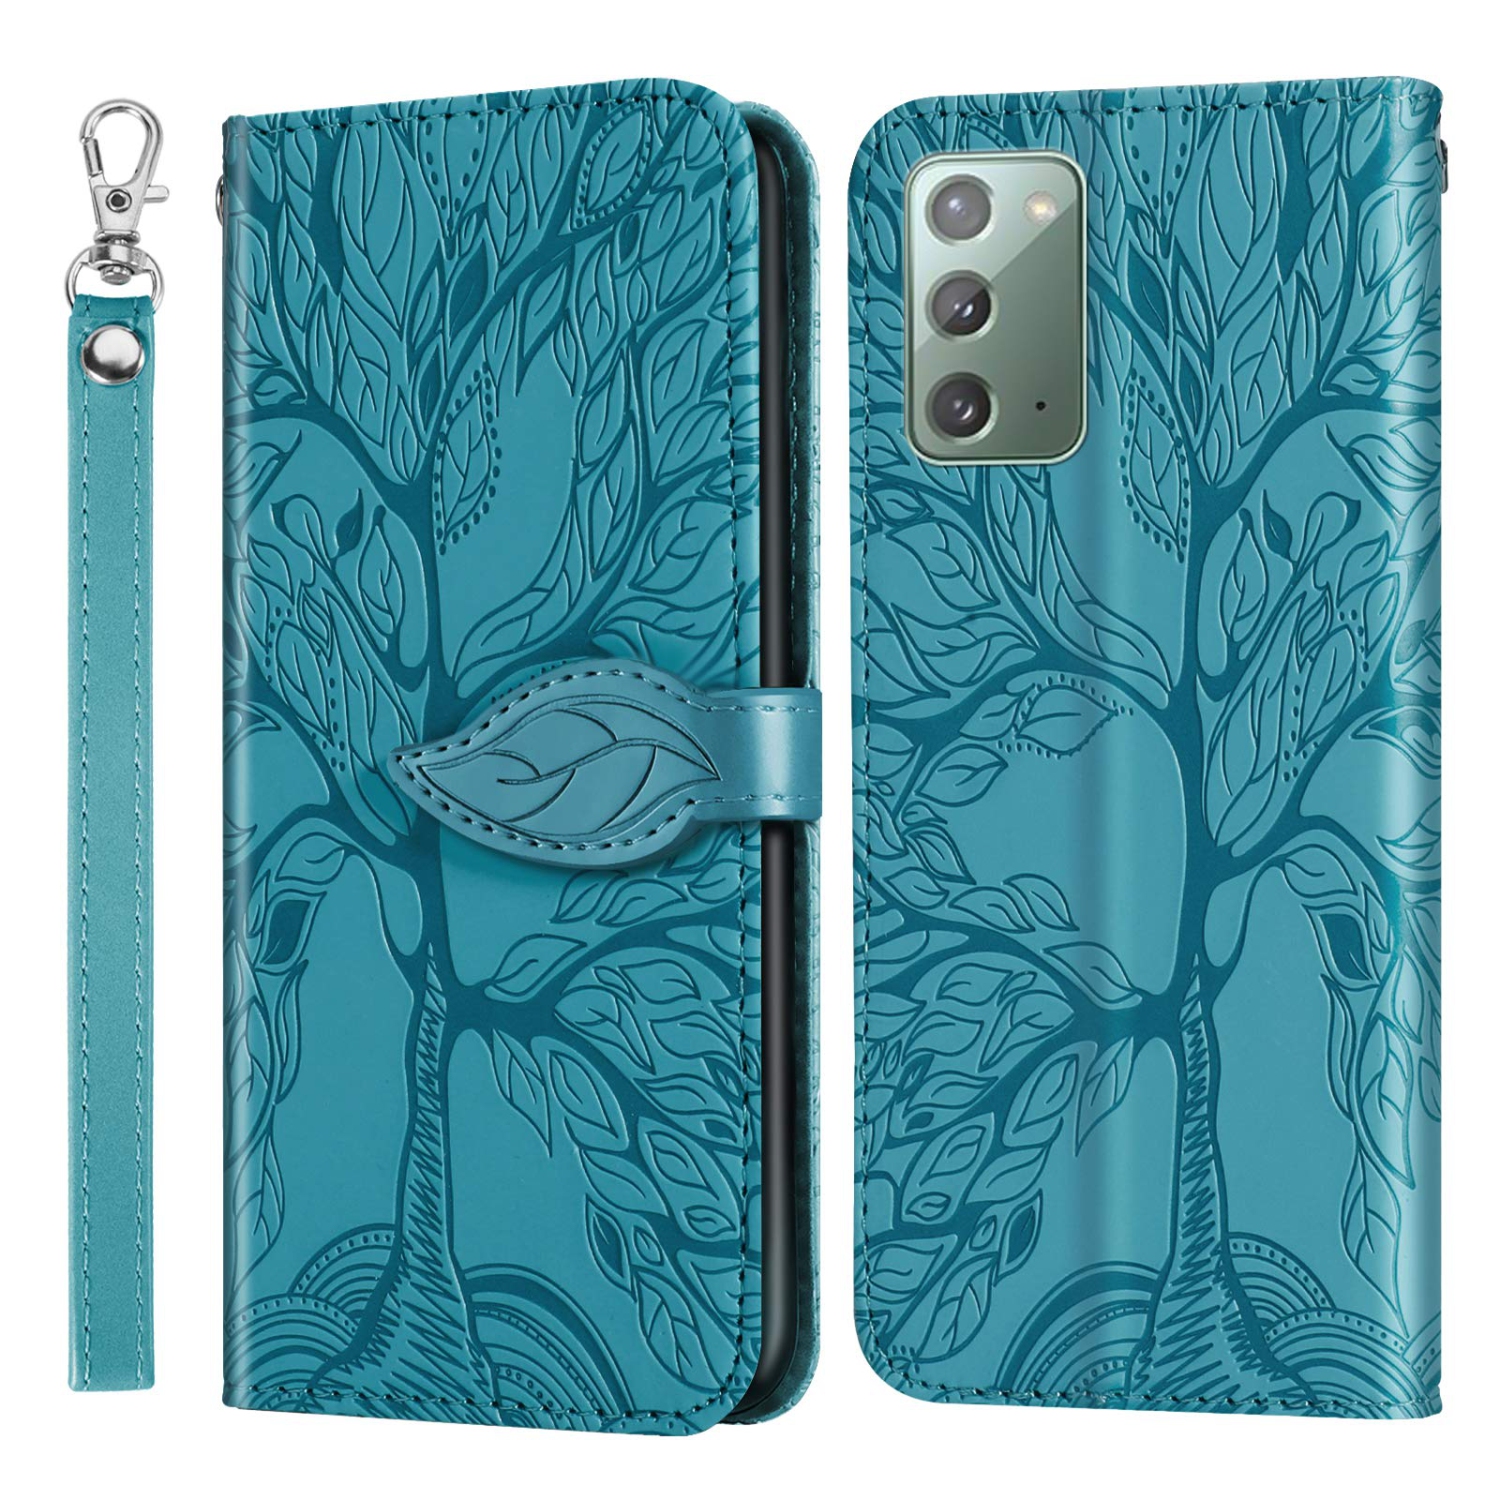 Premium PU Leather Embossed Tree Wallet Case with card slots and wrist strap for Samsung Galaxy Note 20 SM-N980